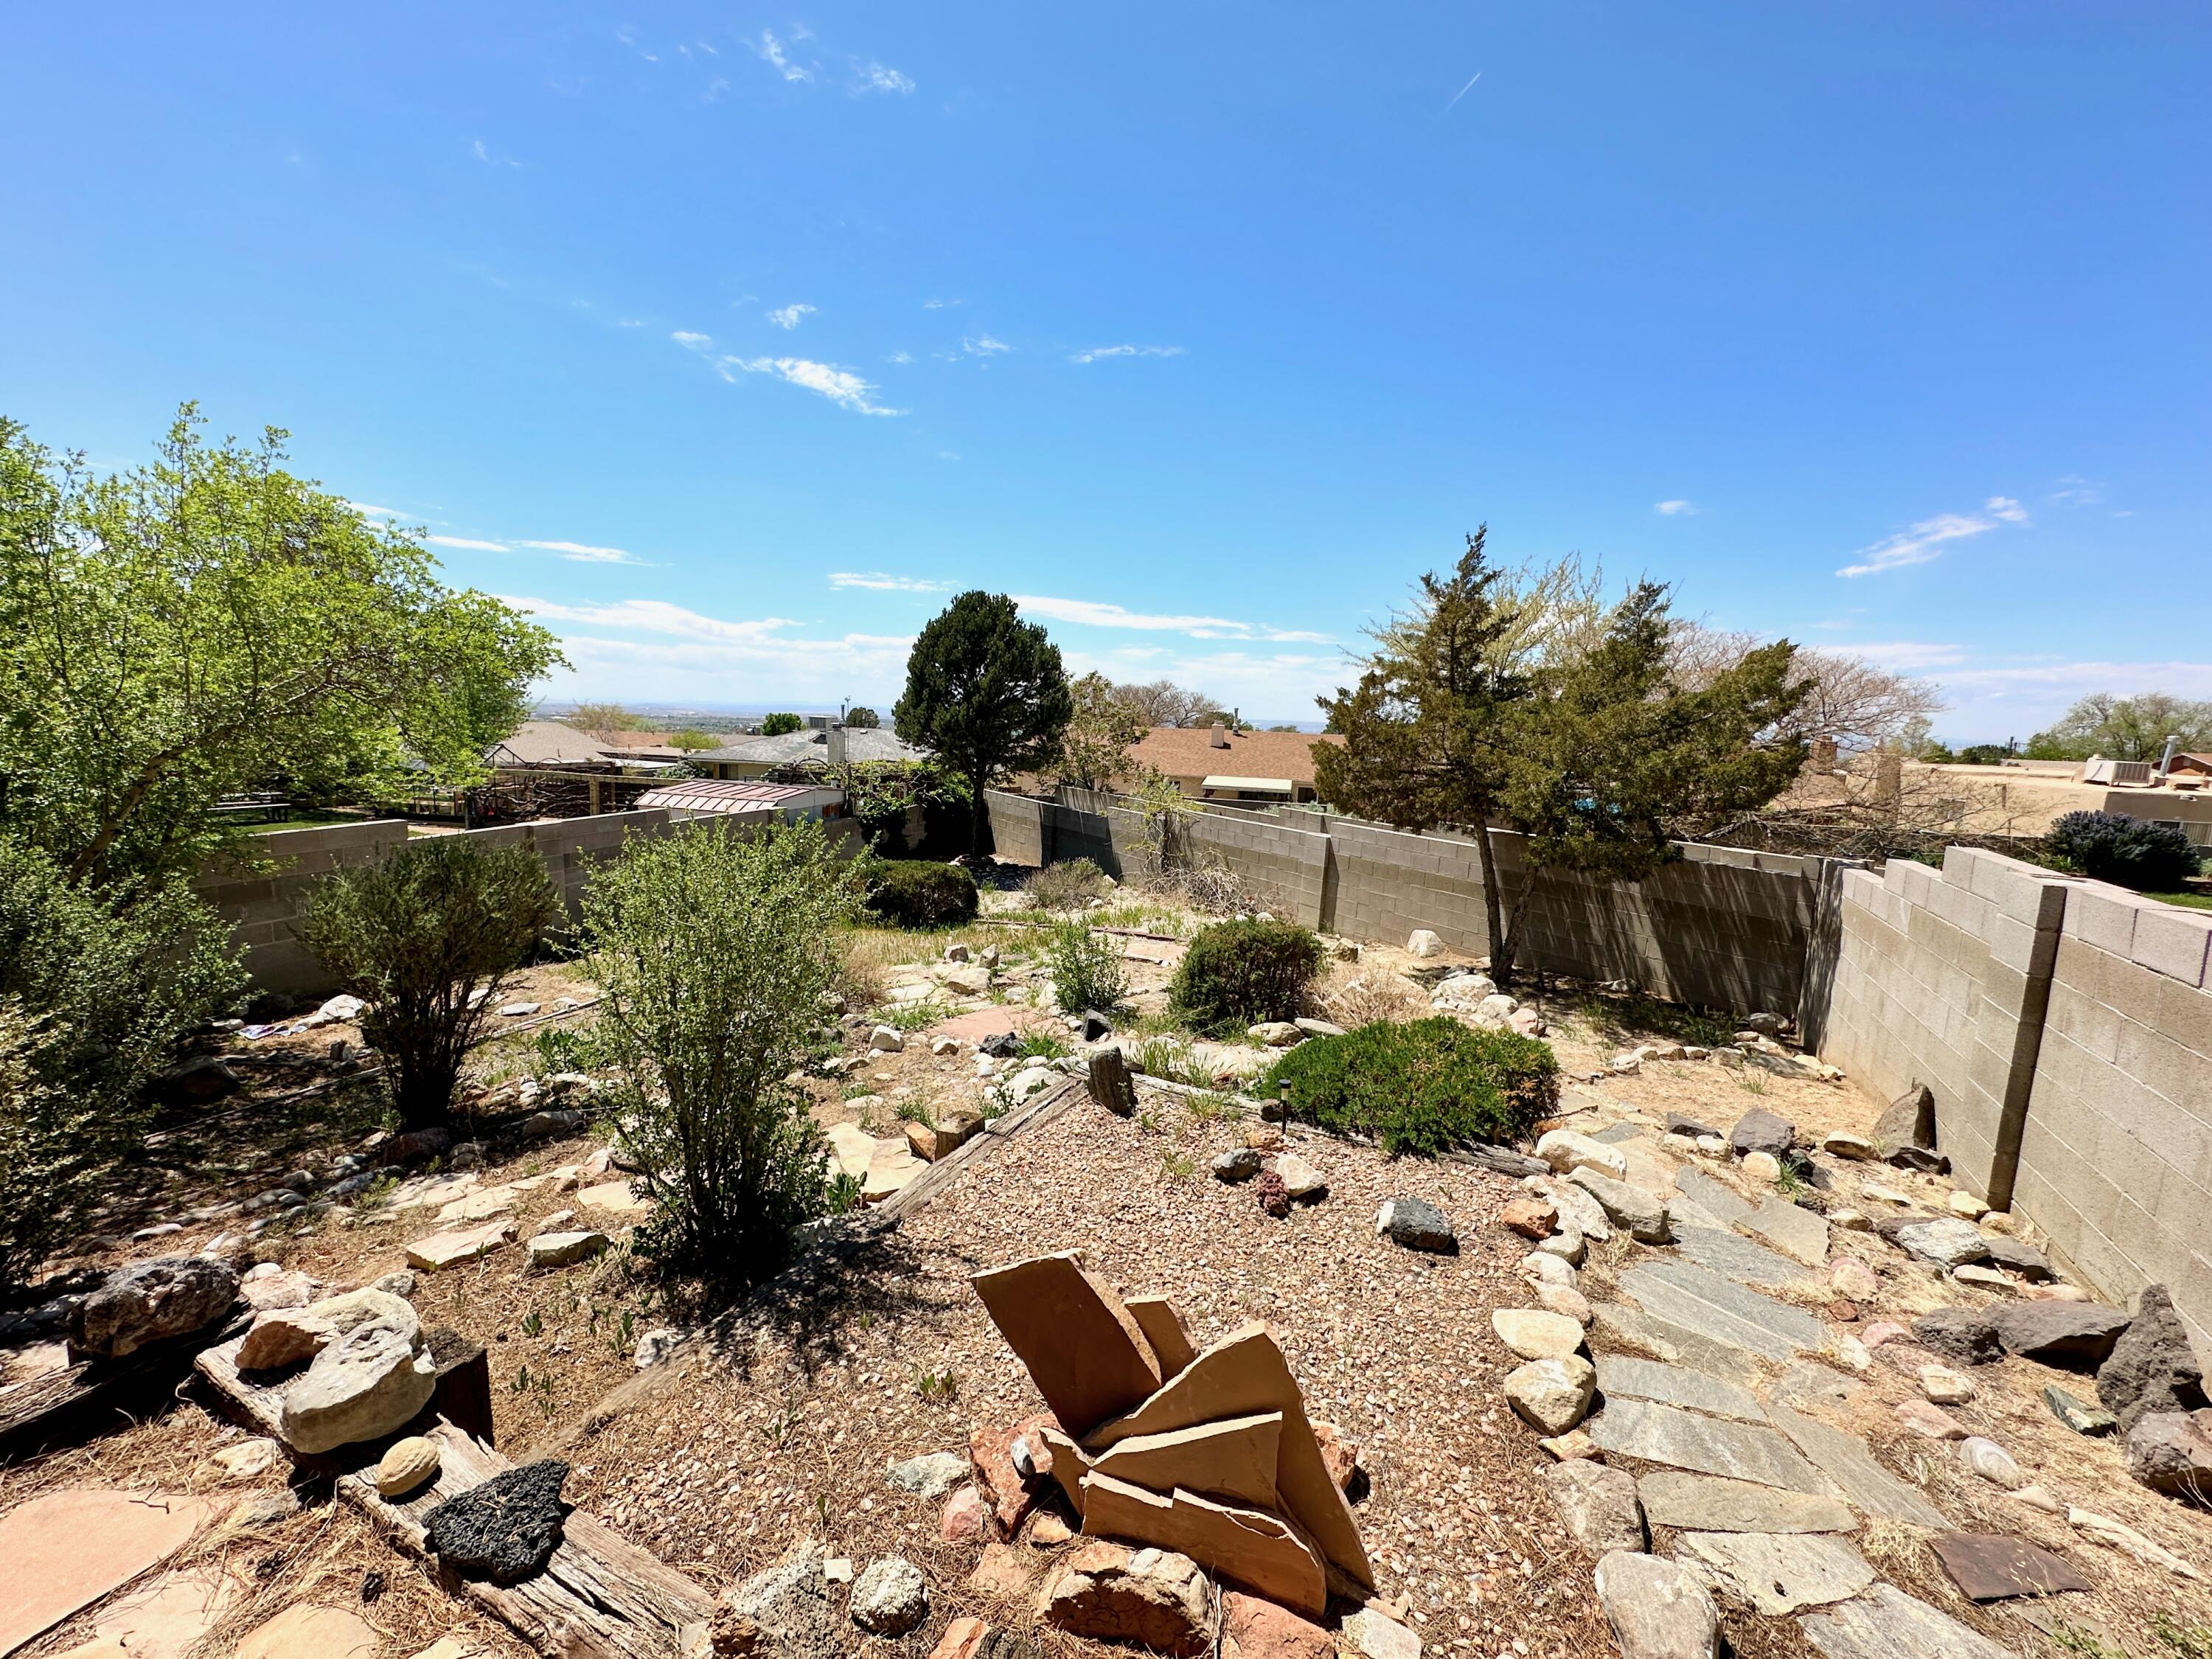 13100 Summer Place NE, Albuquerque, New Mexico 87112, 3 Bedrooms Bedrooms, ,2 BathroomsBathrooms,Residential,For Sale,13100 Summer Place NE,1061457